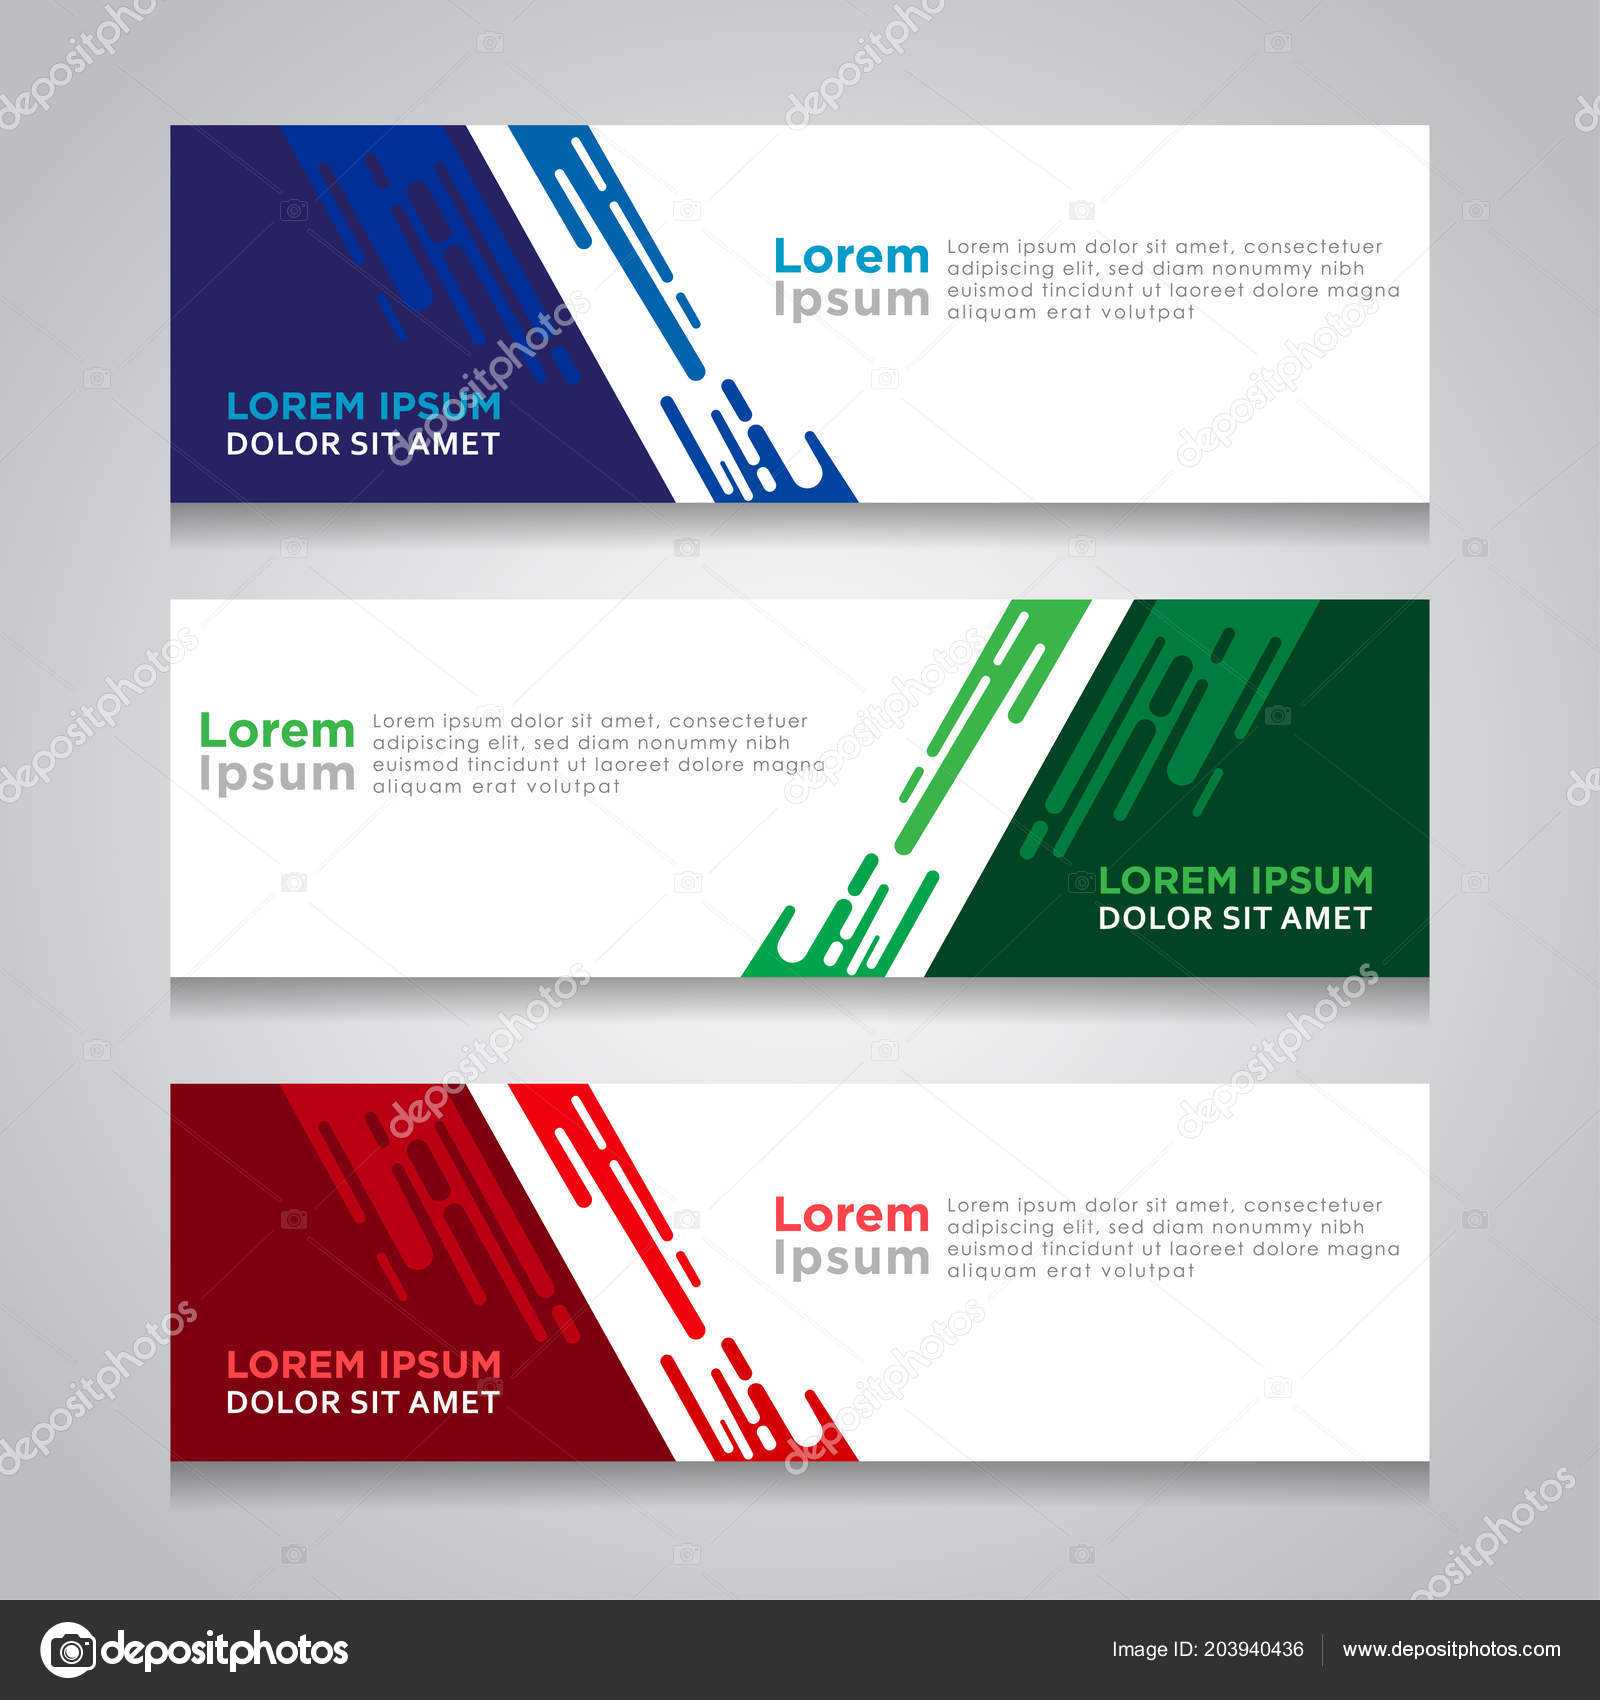 Abstract Web Banner Design Background Header Templates With Website Banner Design Templates